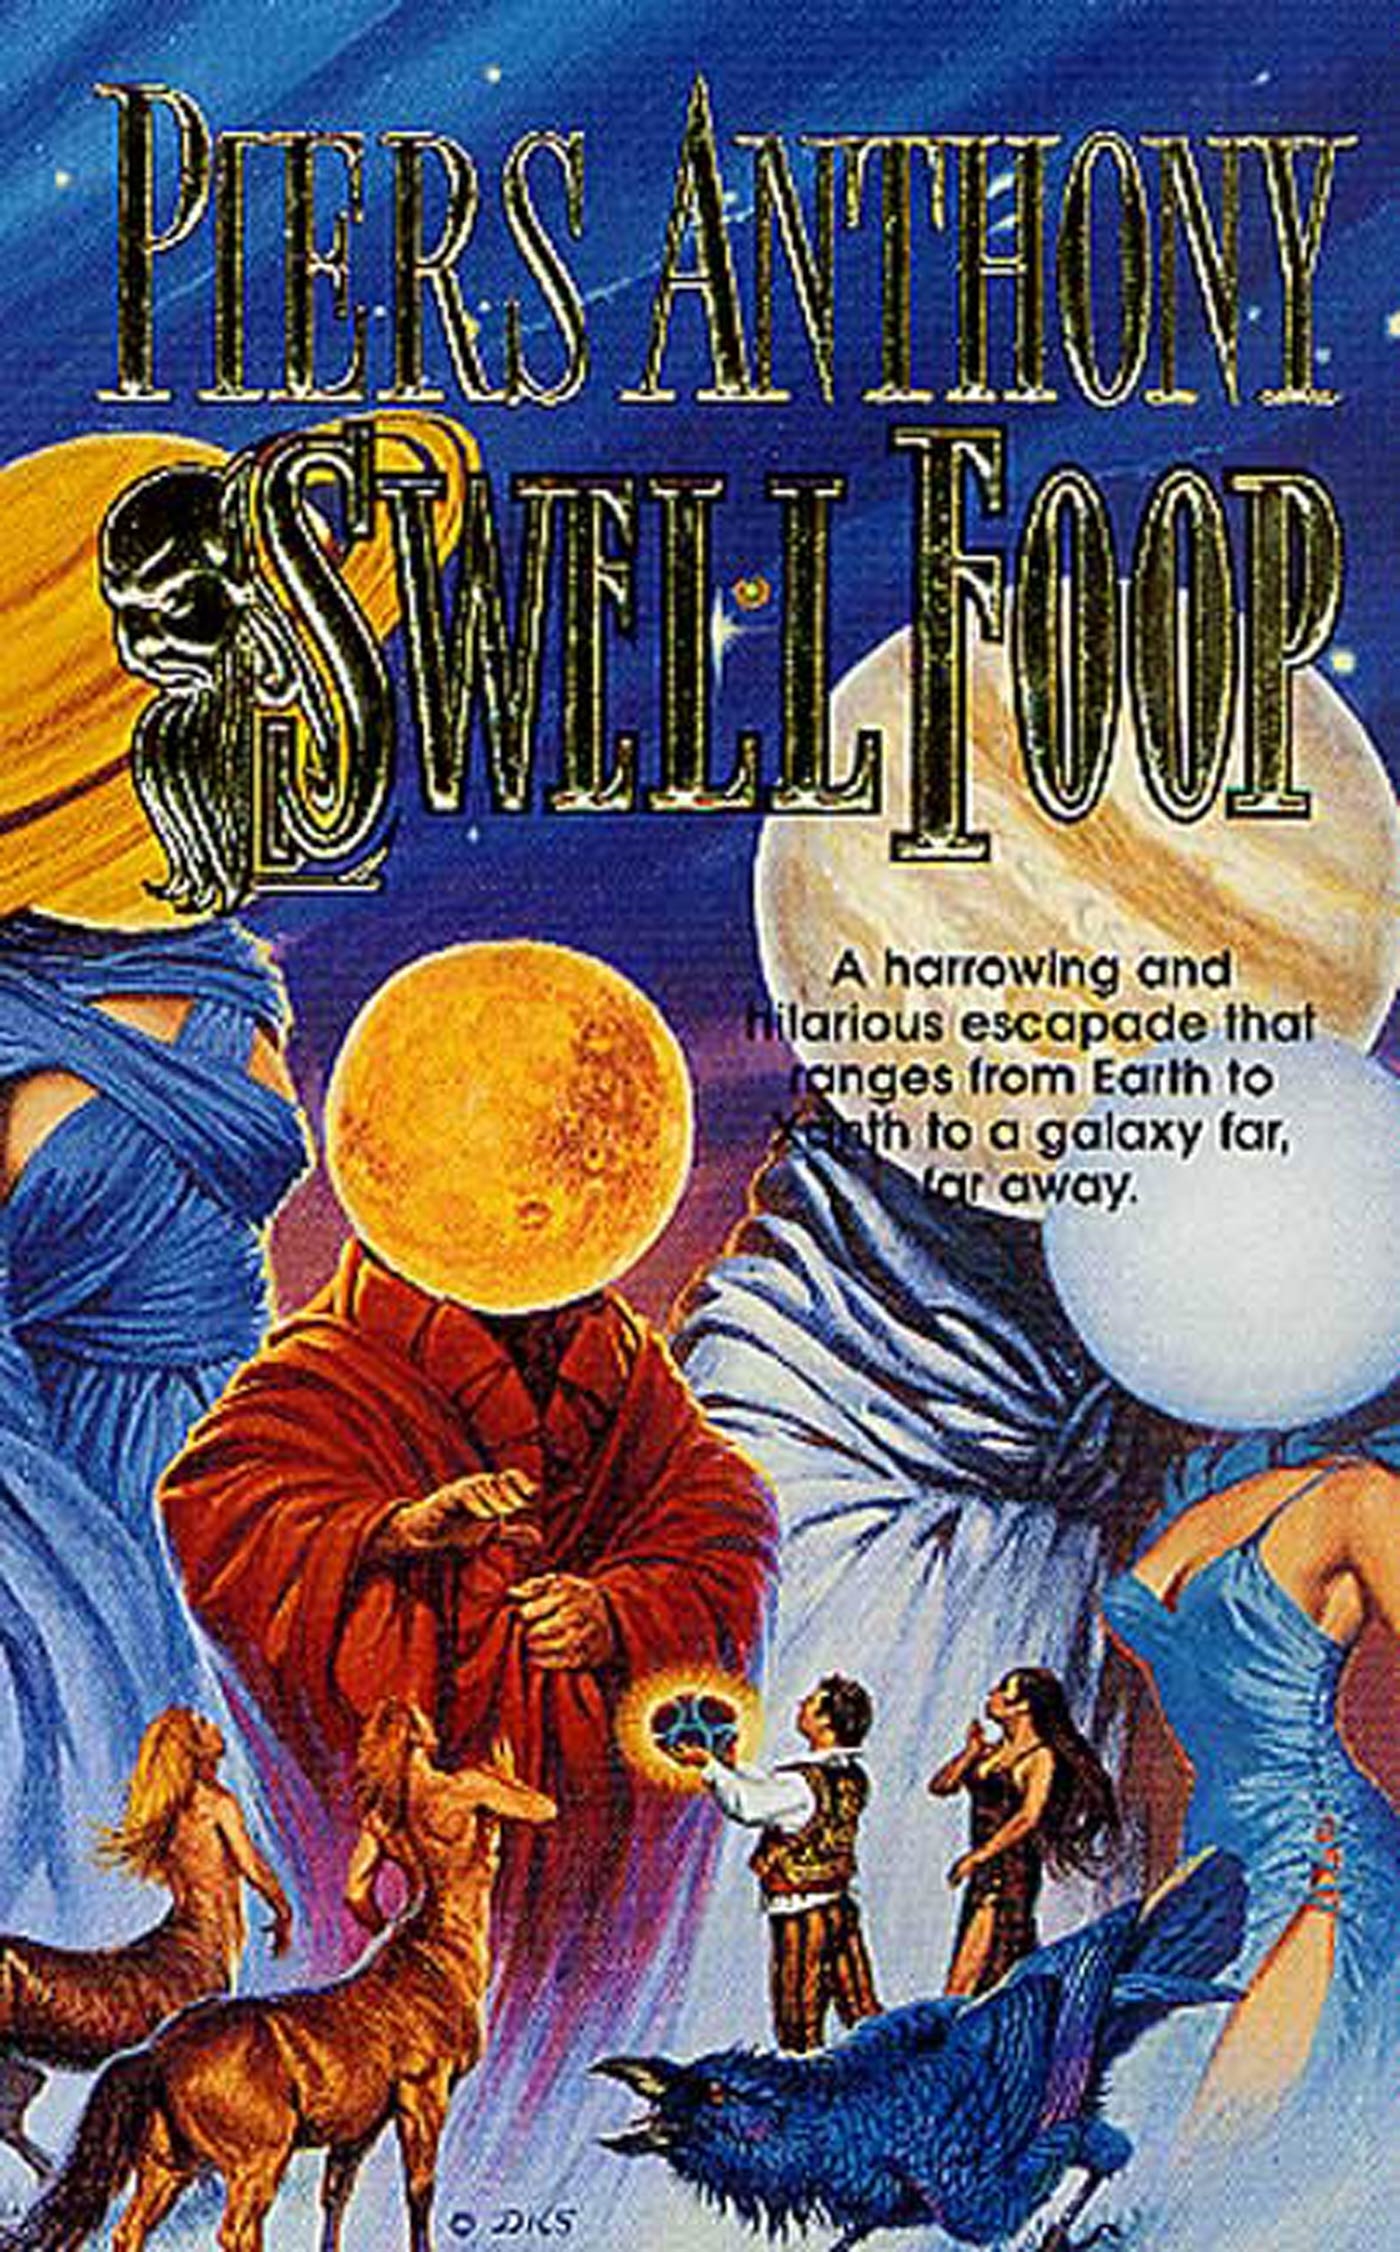 Swell Foop by Piers Anthony